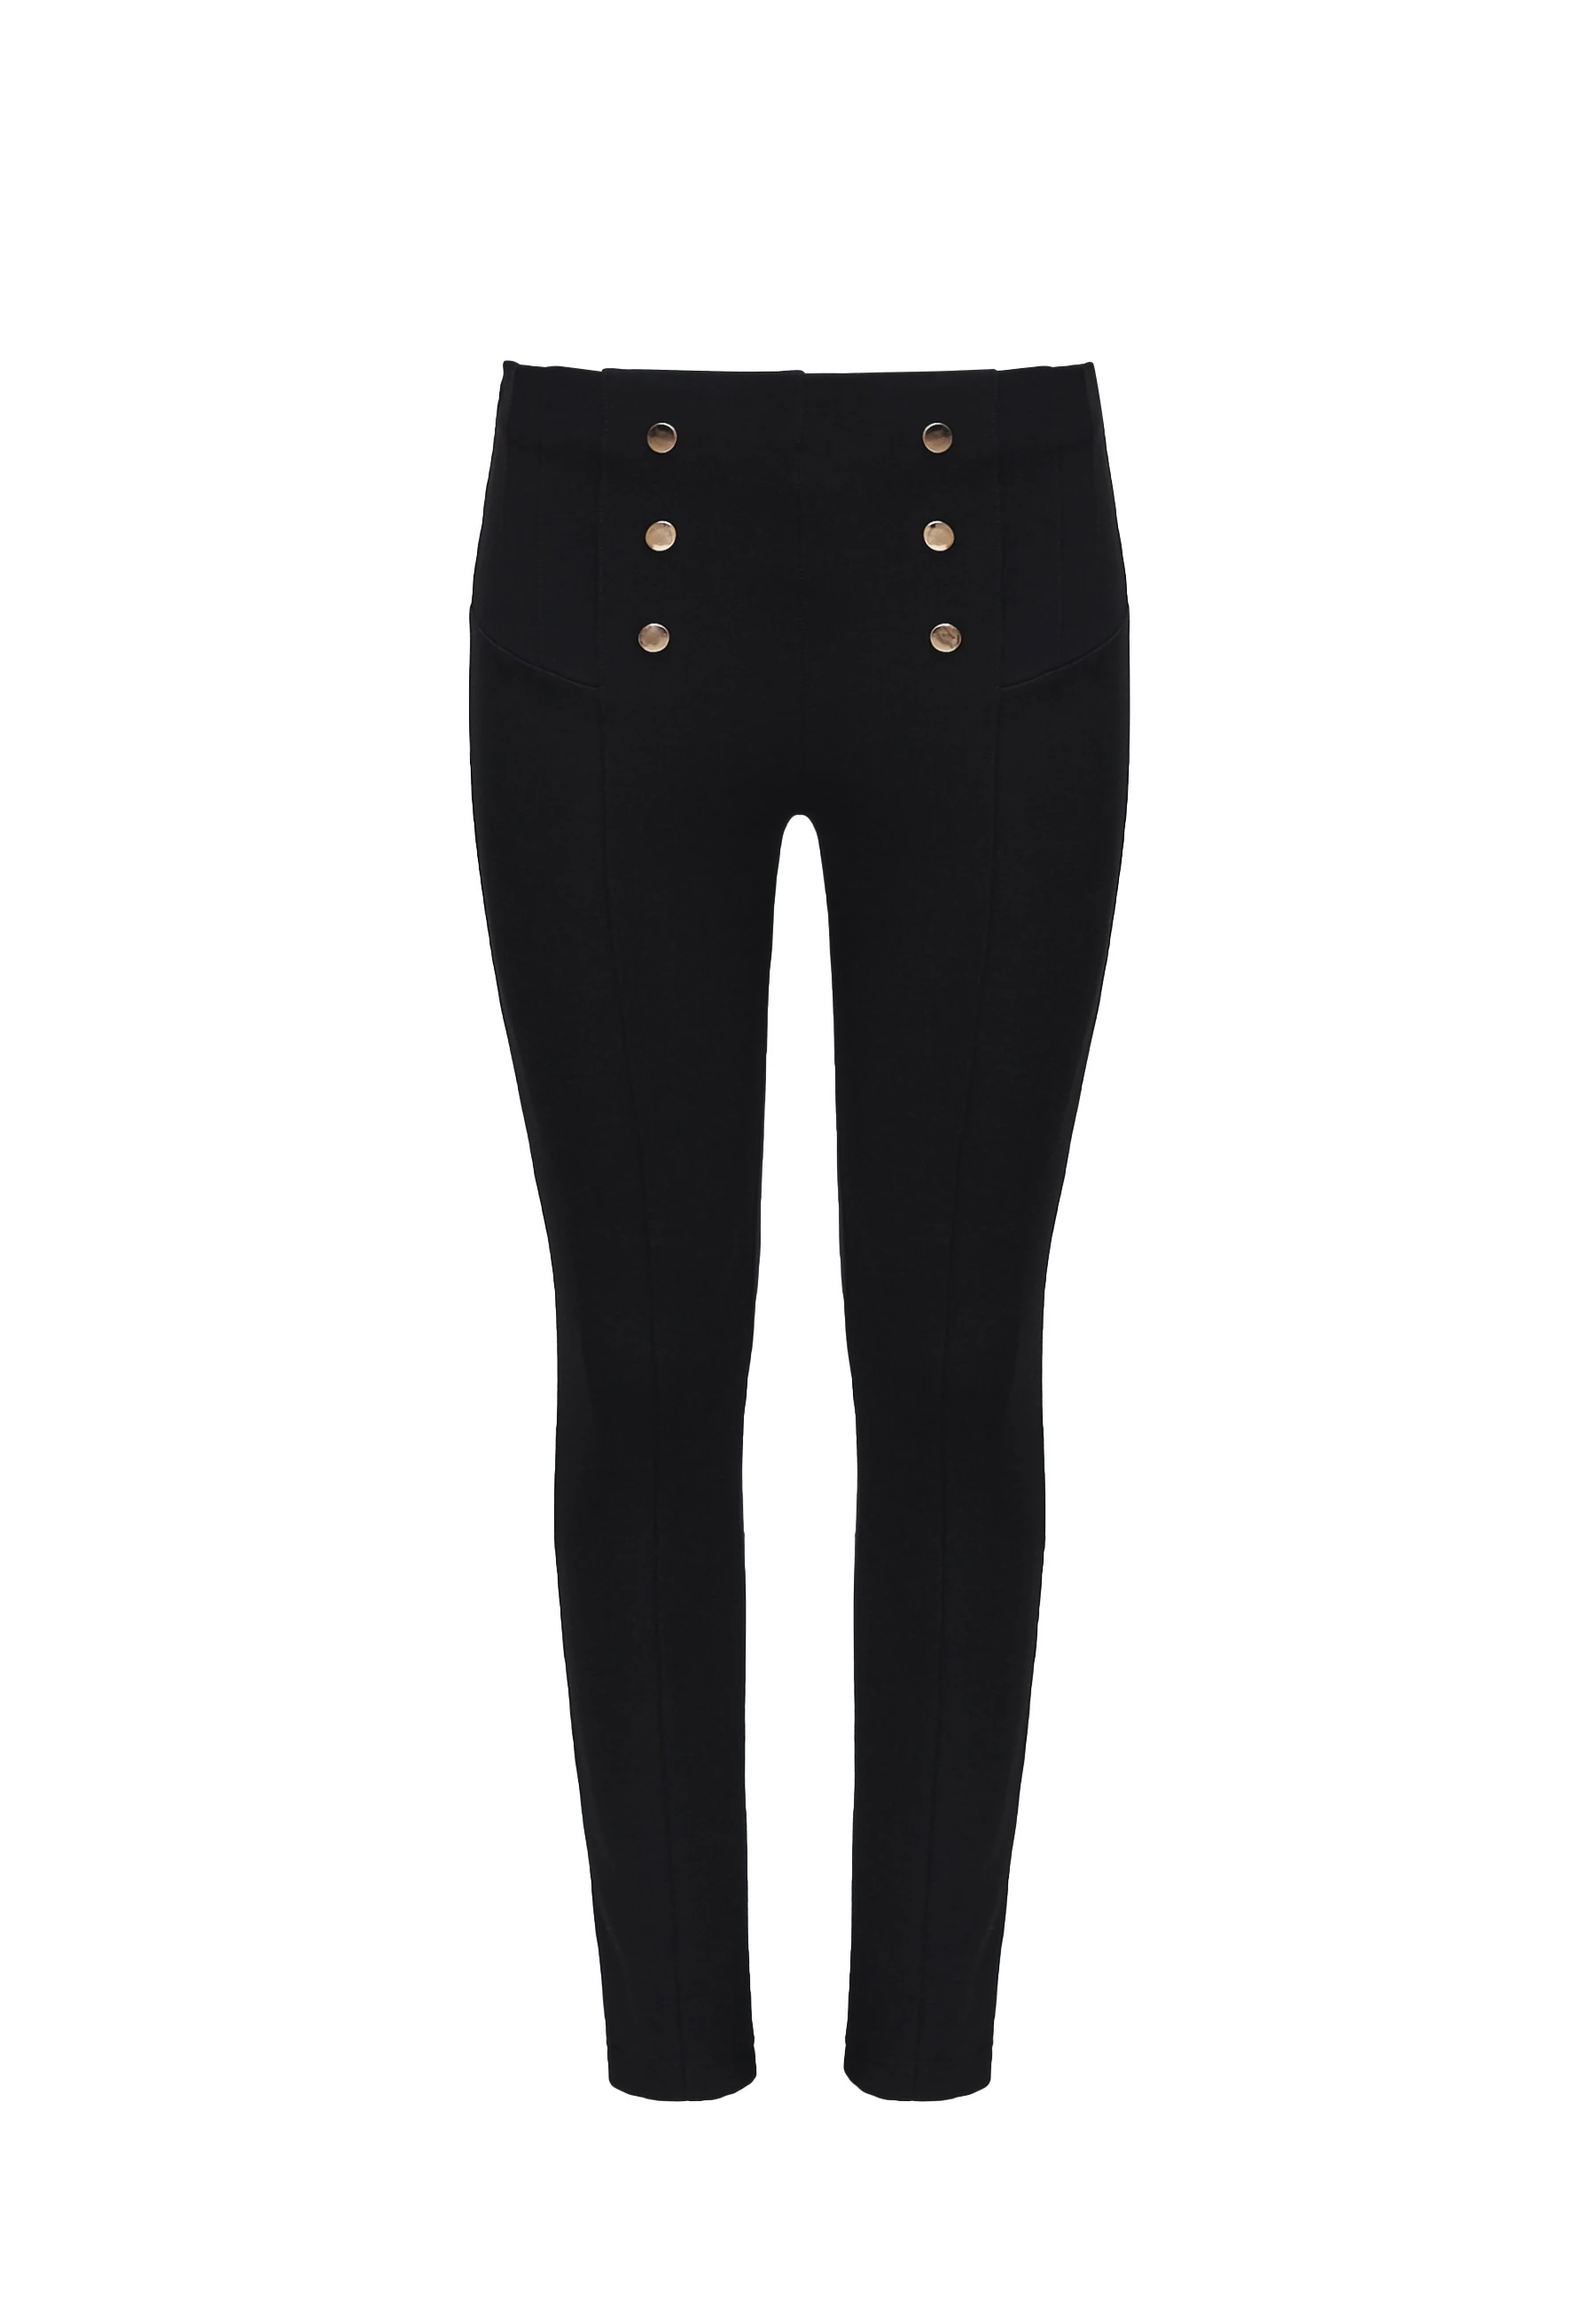 BLACK PANTS WITH GOLD BUTTONS